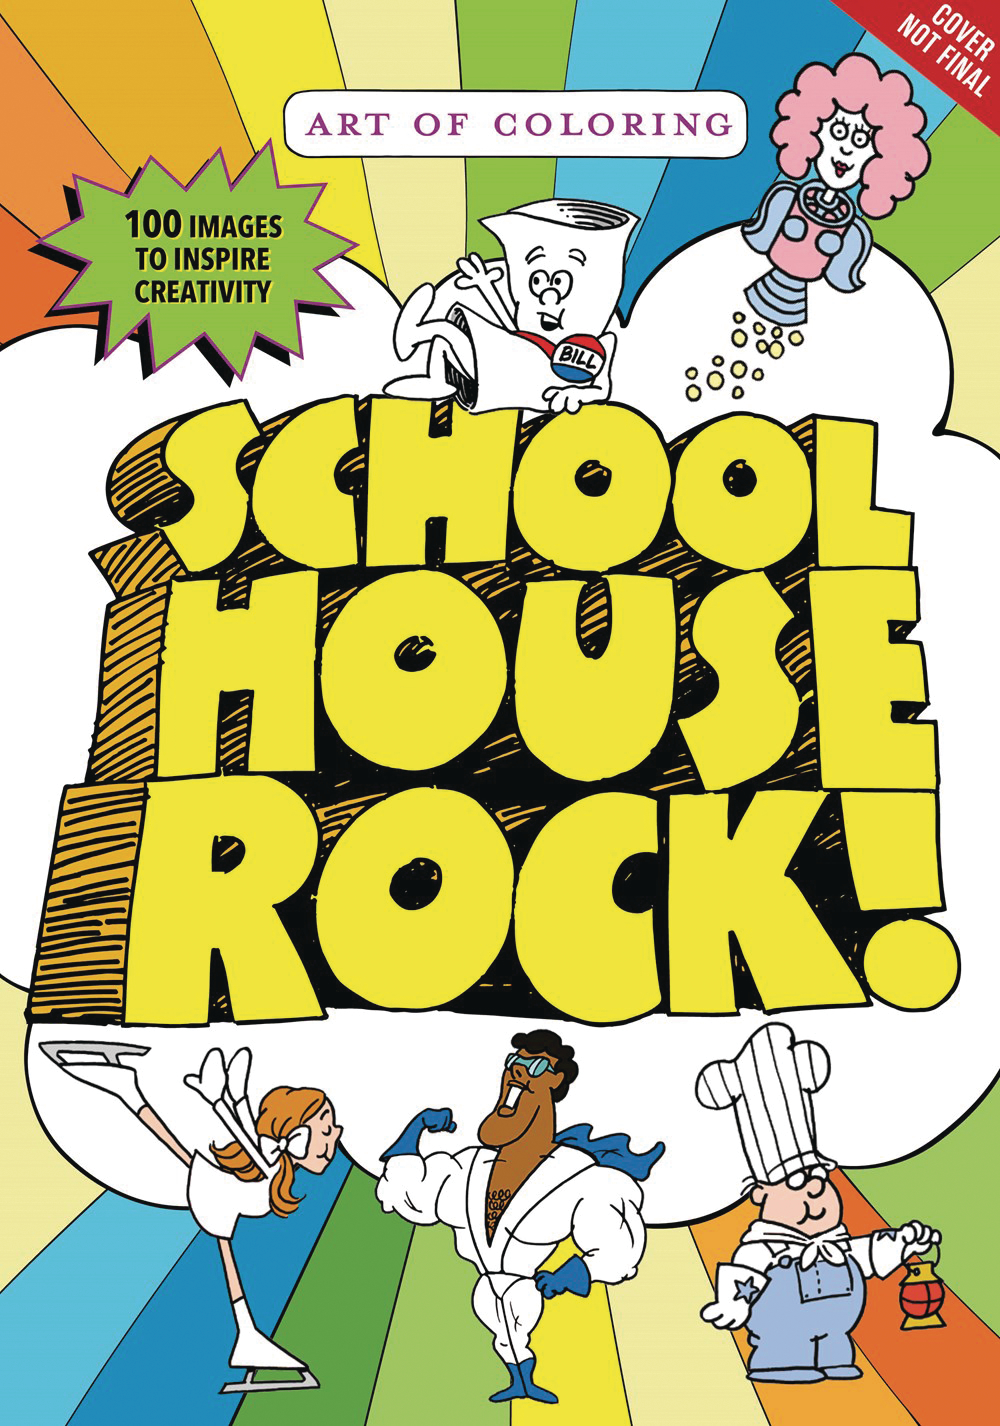 Art of Coloring Soft Coverhoolhouse Rock Soft Cover